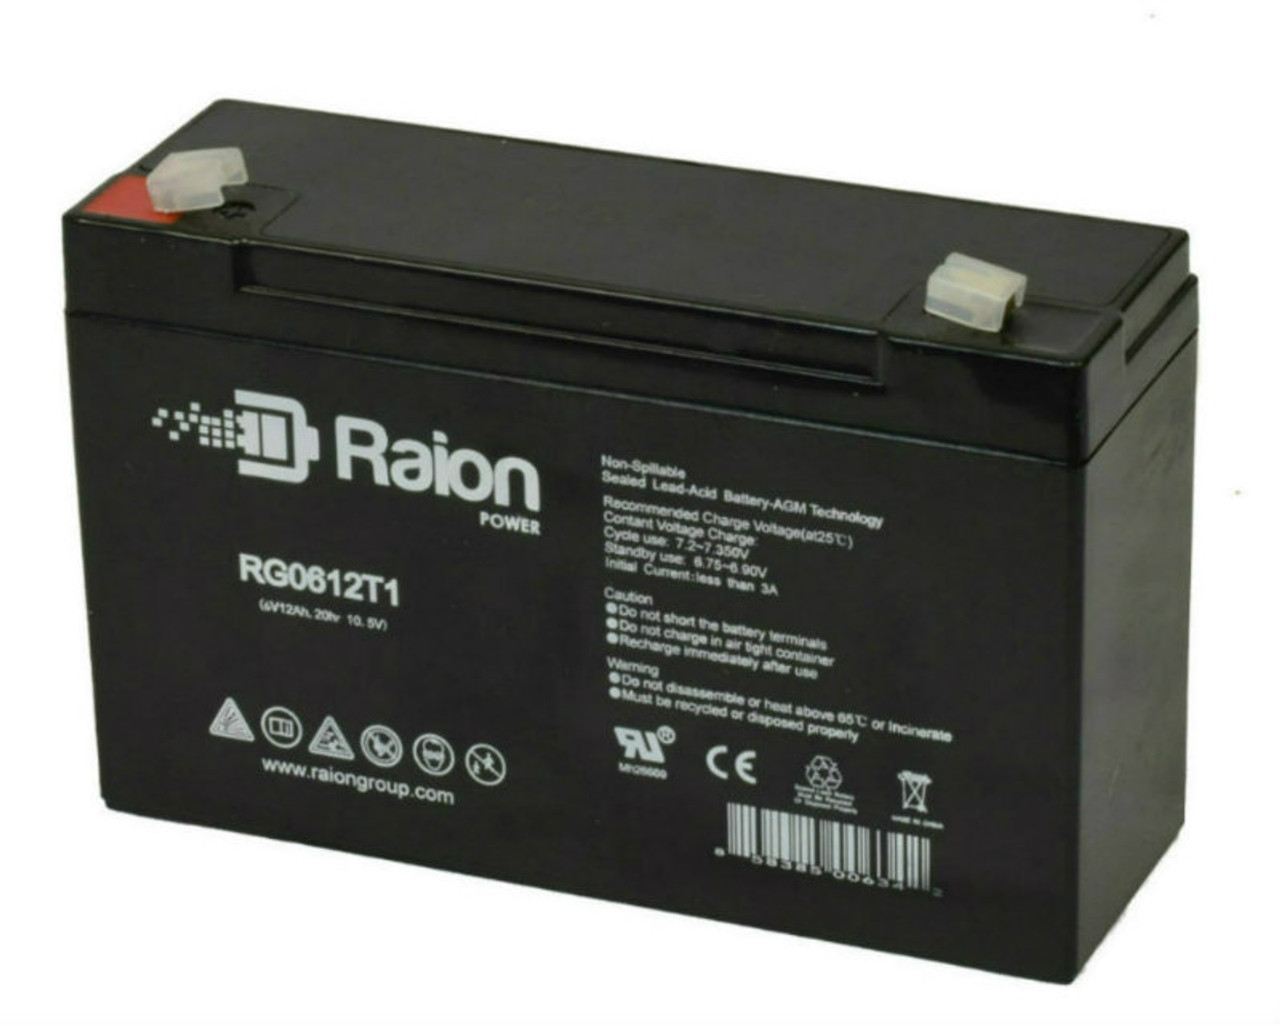 Raion Power RG06120T1 6V 12Ah Replacement UPS Battery Cartridge for MGE Pulsar ES10